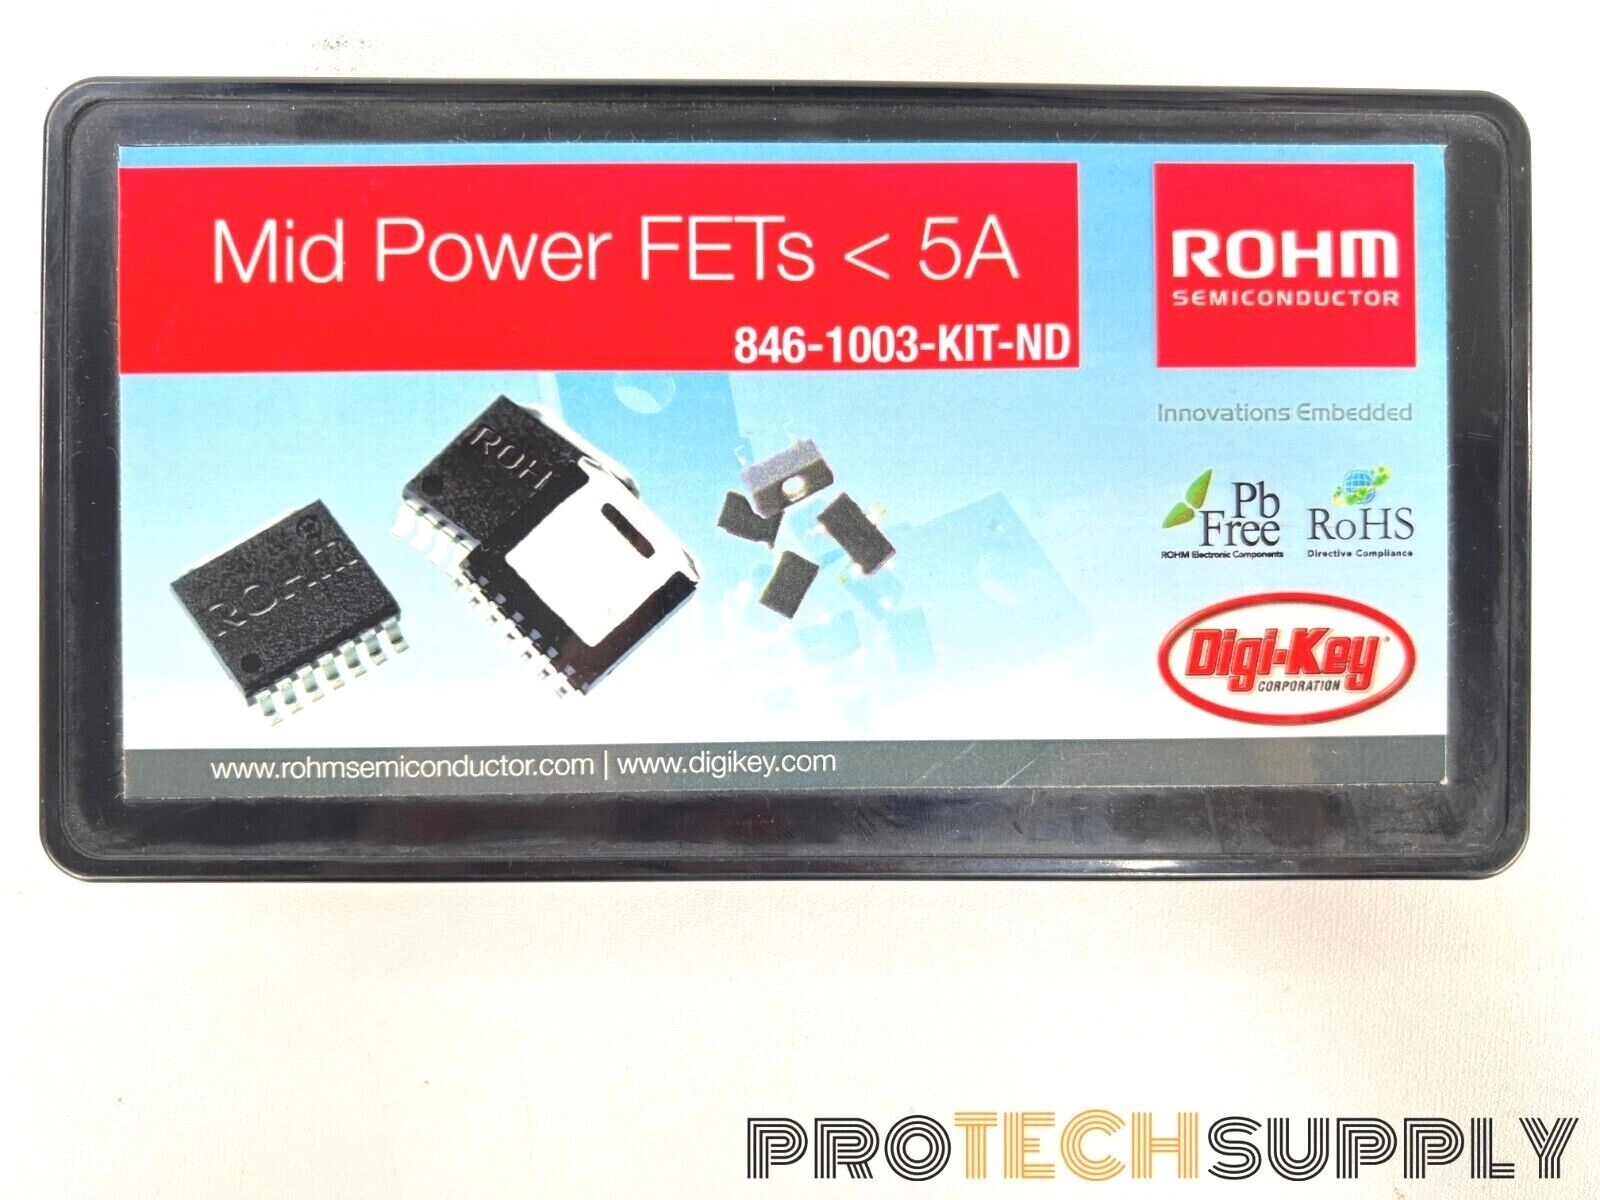 ROHM Semiconductor 846-1003-KIT-ND Mid Power FETs 